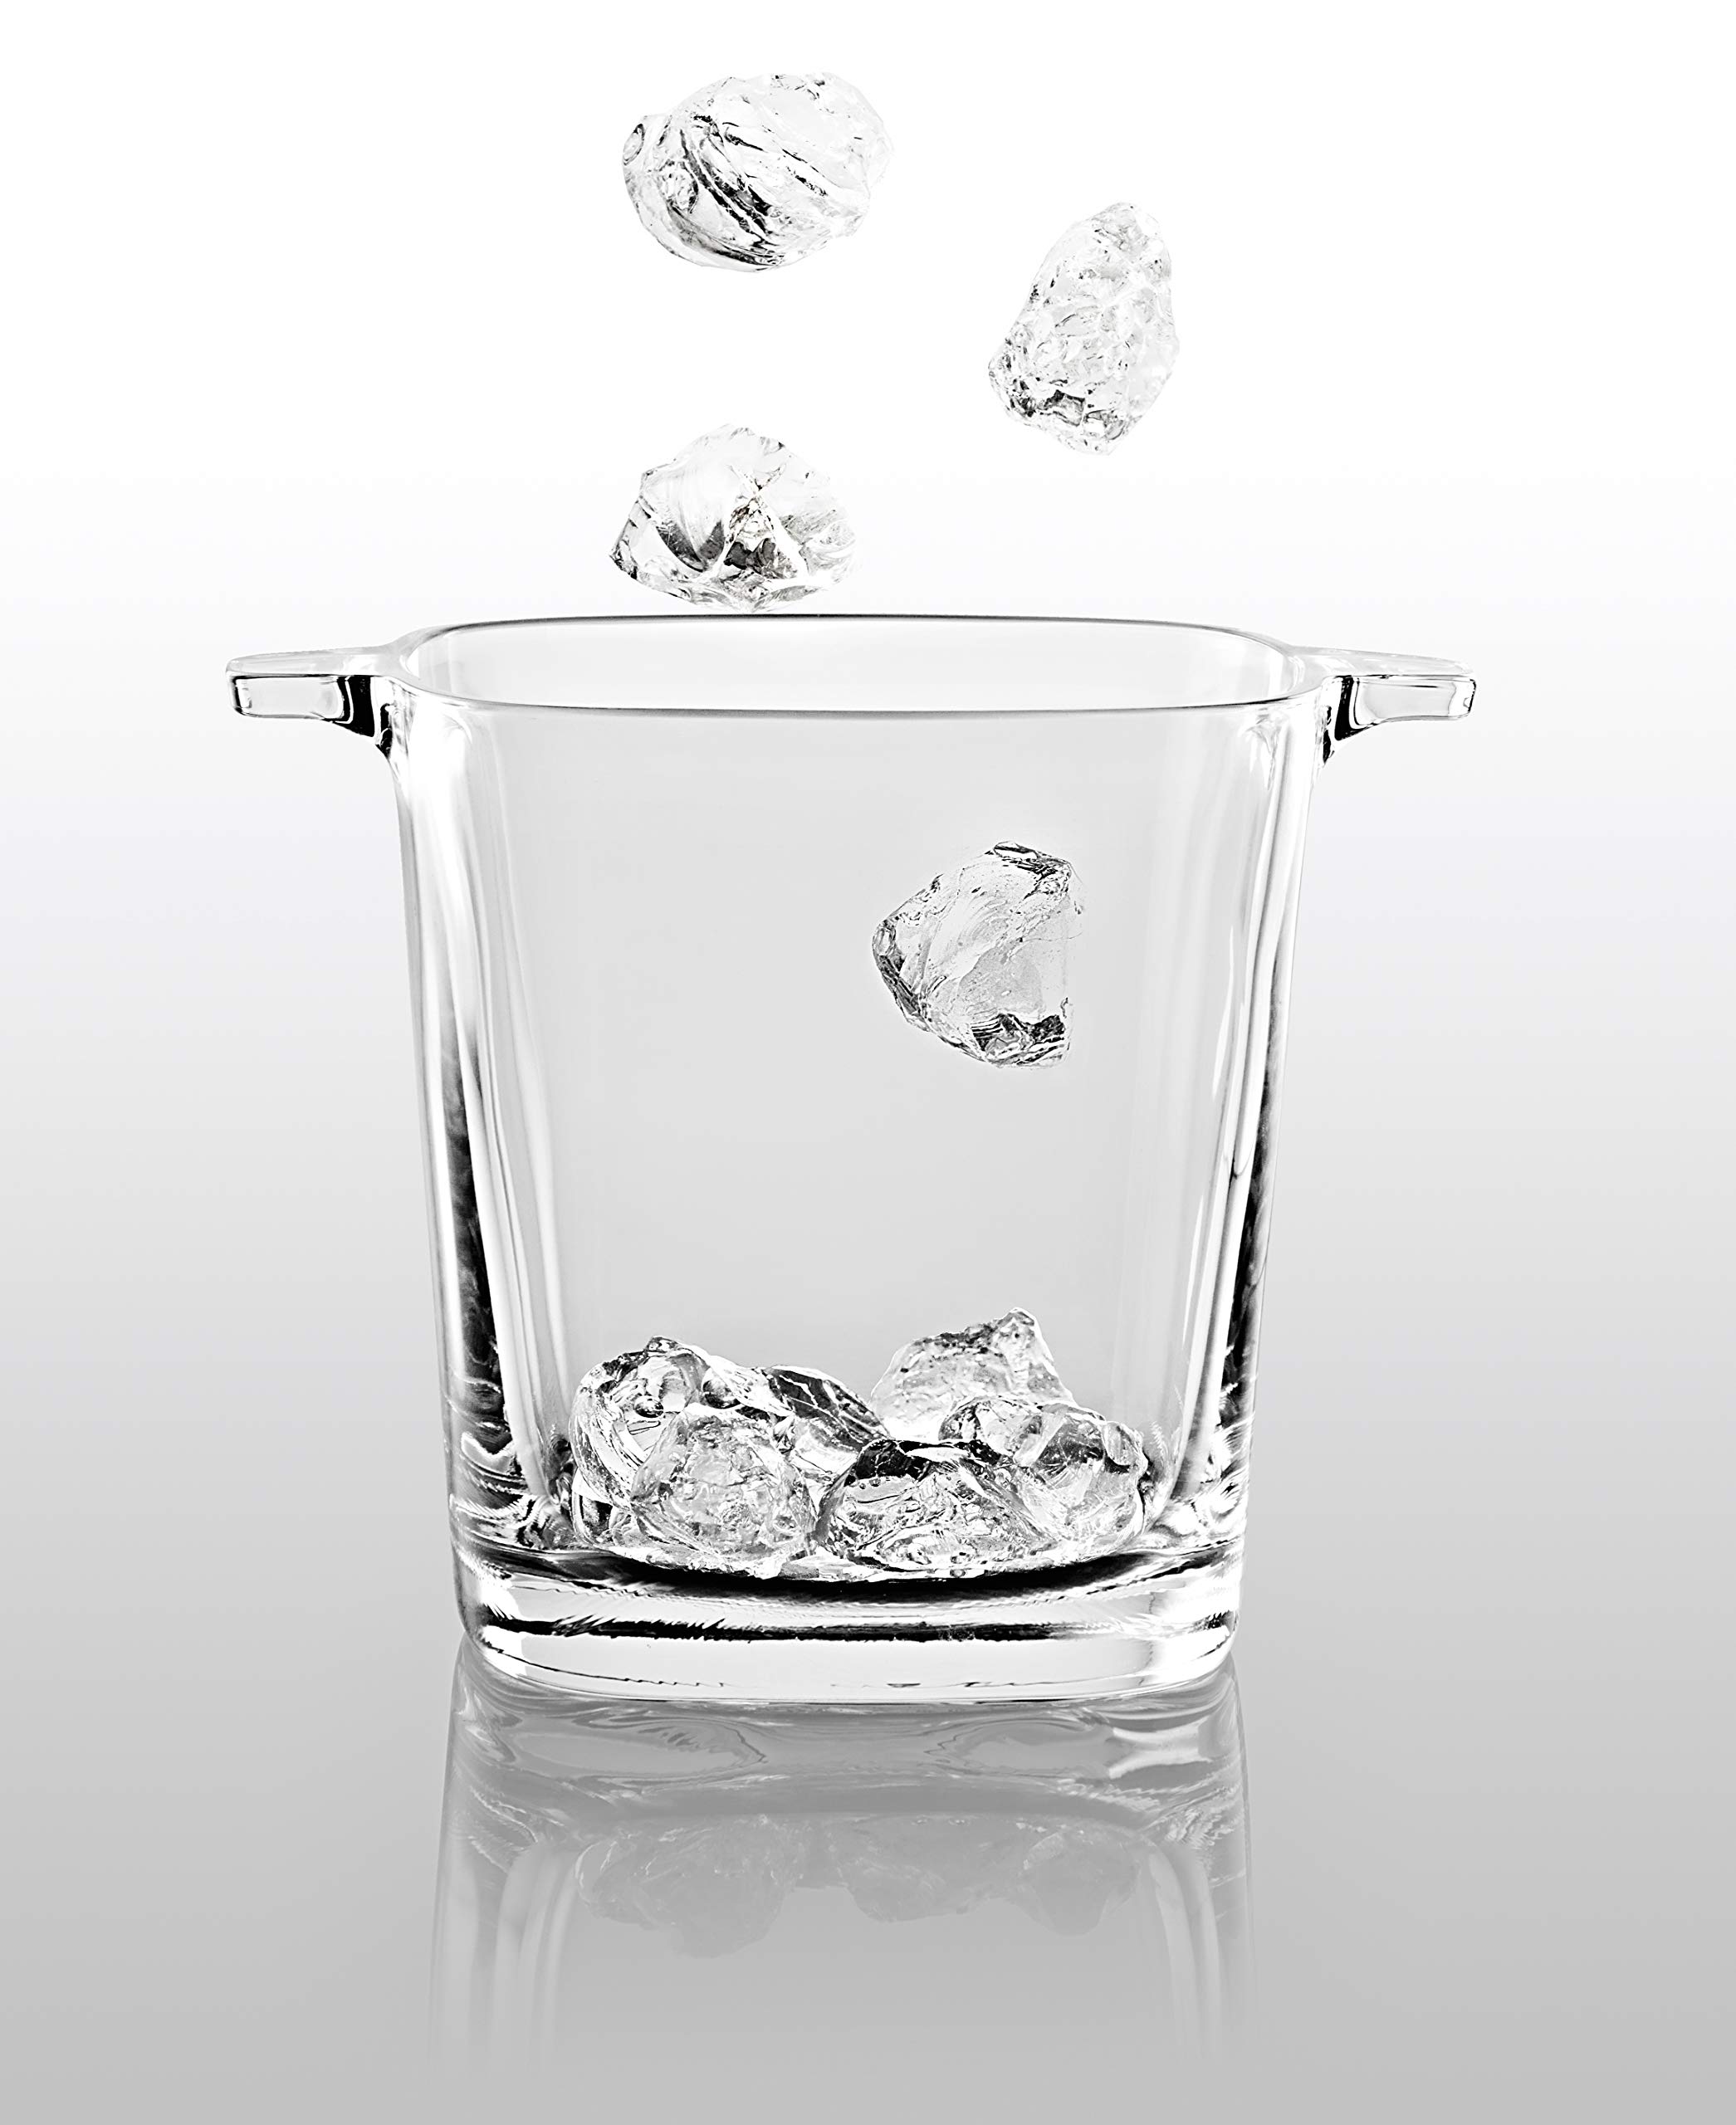 Glass - Ice Bucket - 5.7" H - By Barski - European Quality Glass - Square Shaped - with Two Handles - Made in Europe